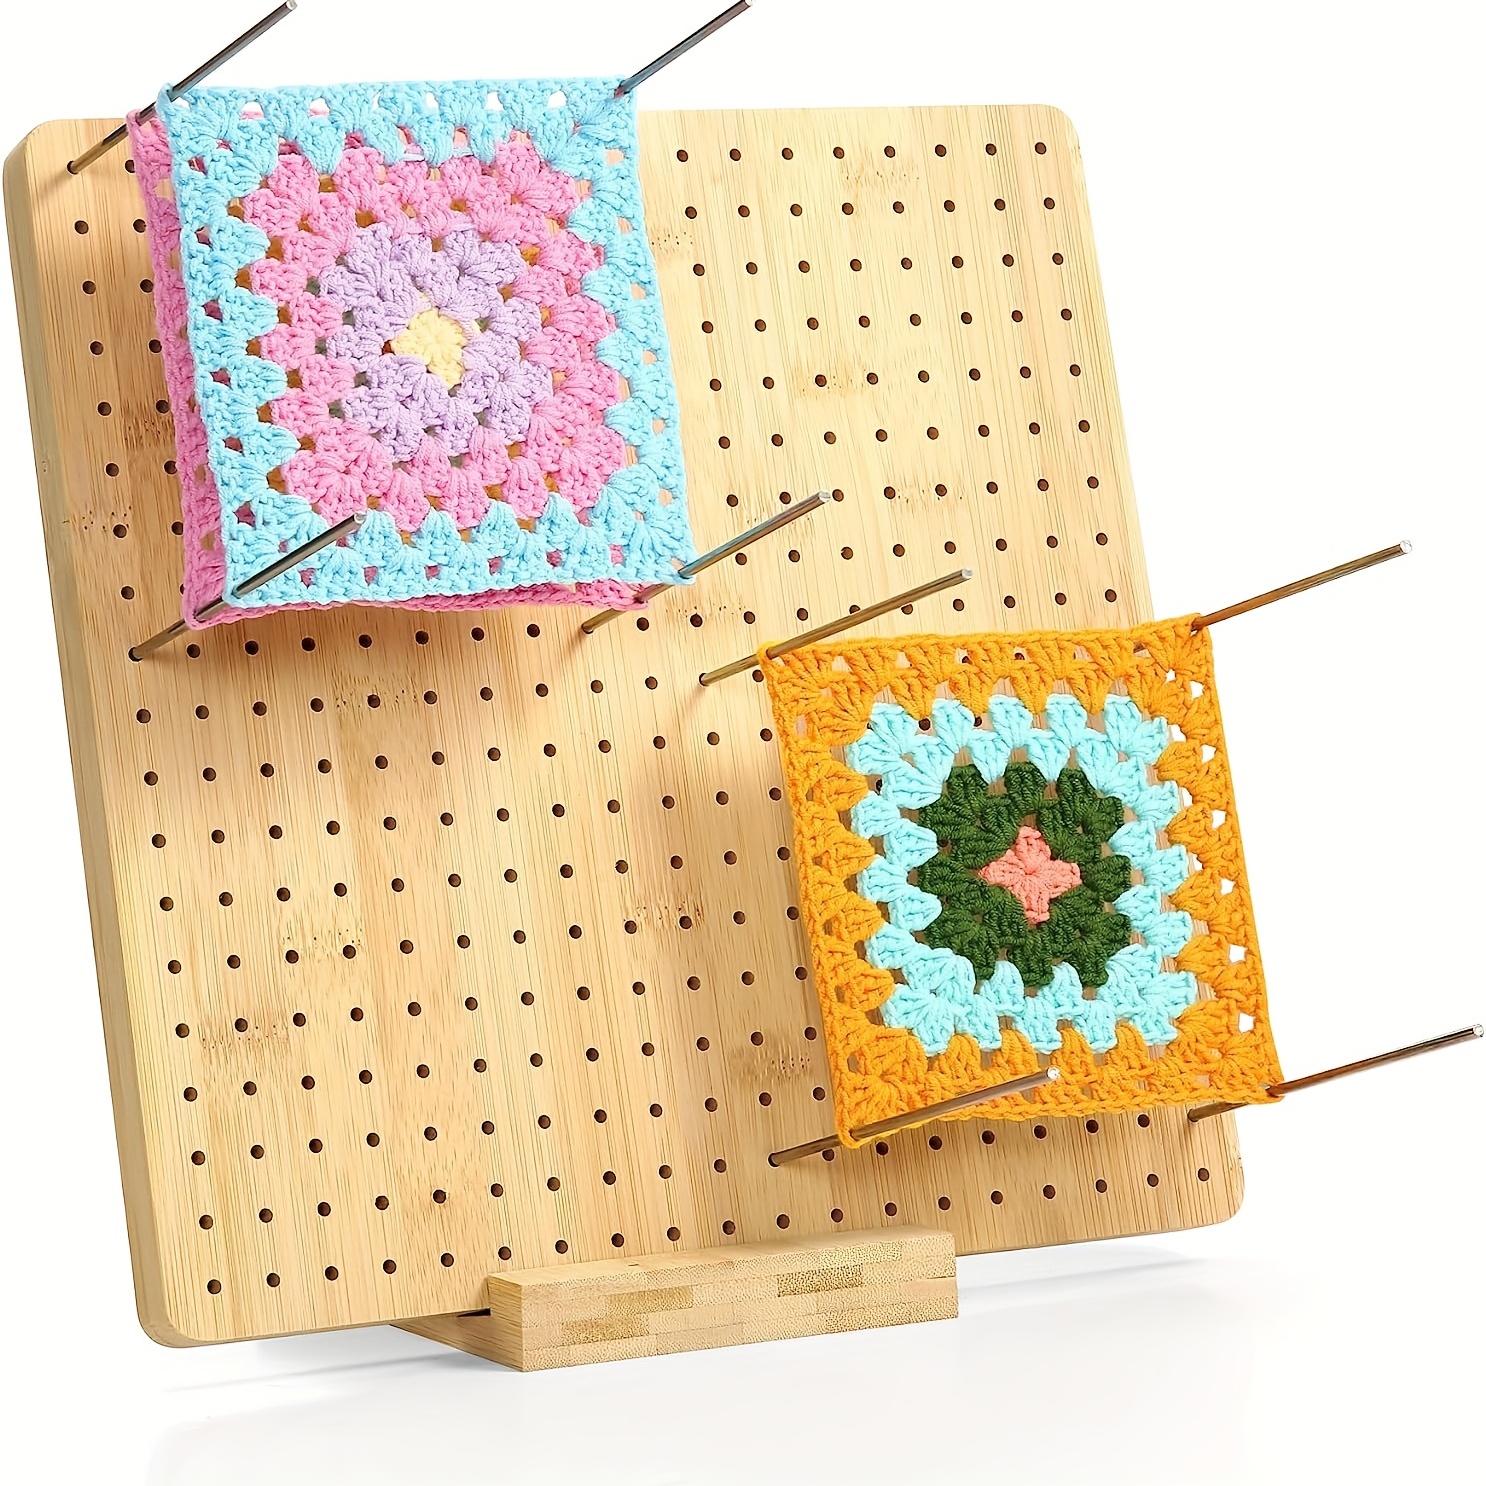 Natural Wooden Blocking Board With Stainless Steel Pins, for Granny  Squares,afghan Squares,crochet Motifs,blocking Board for Crochet Project 